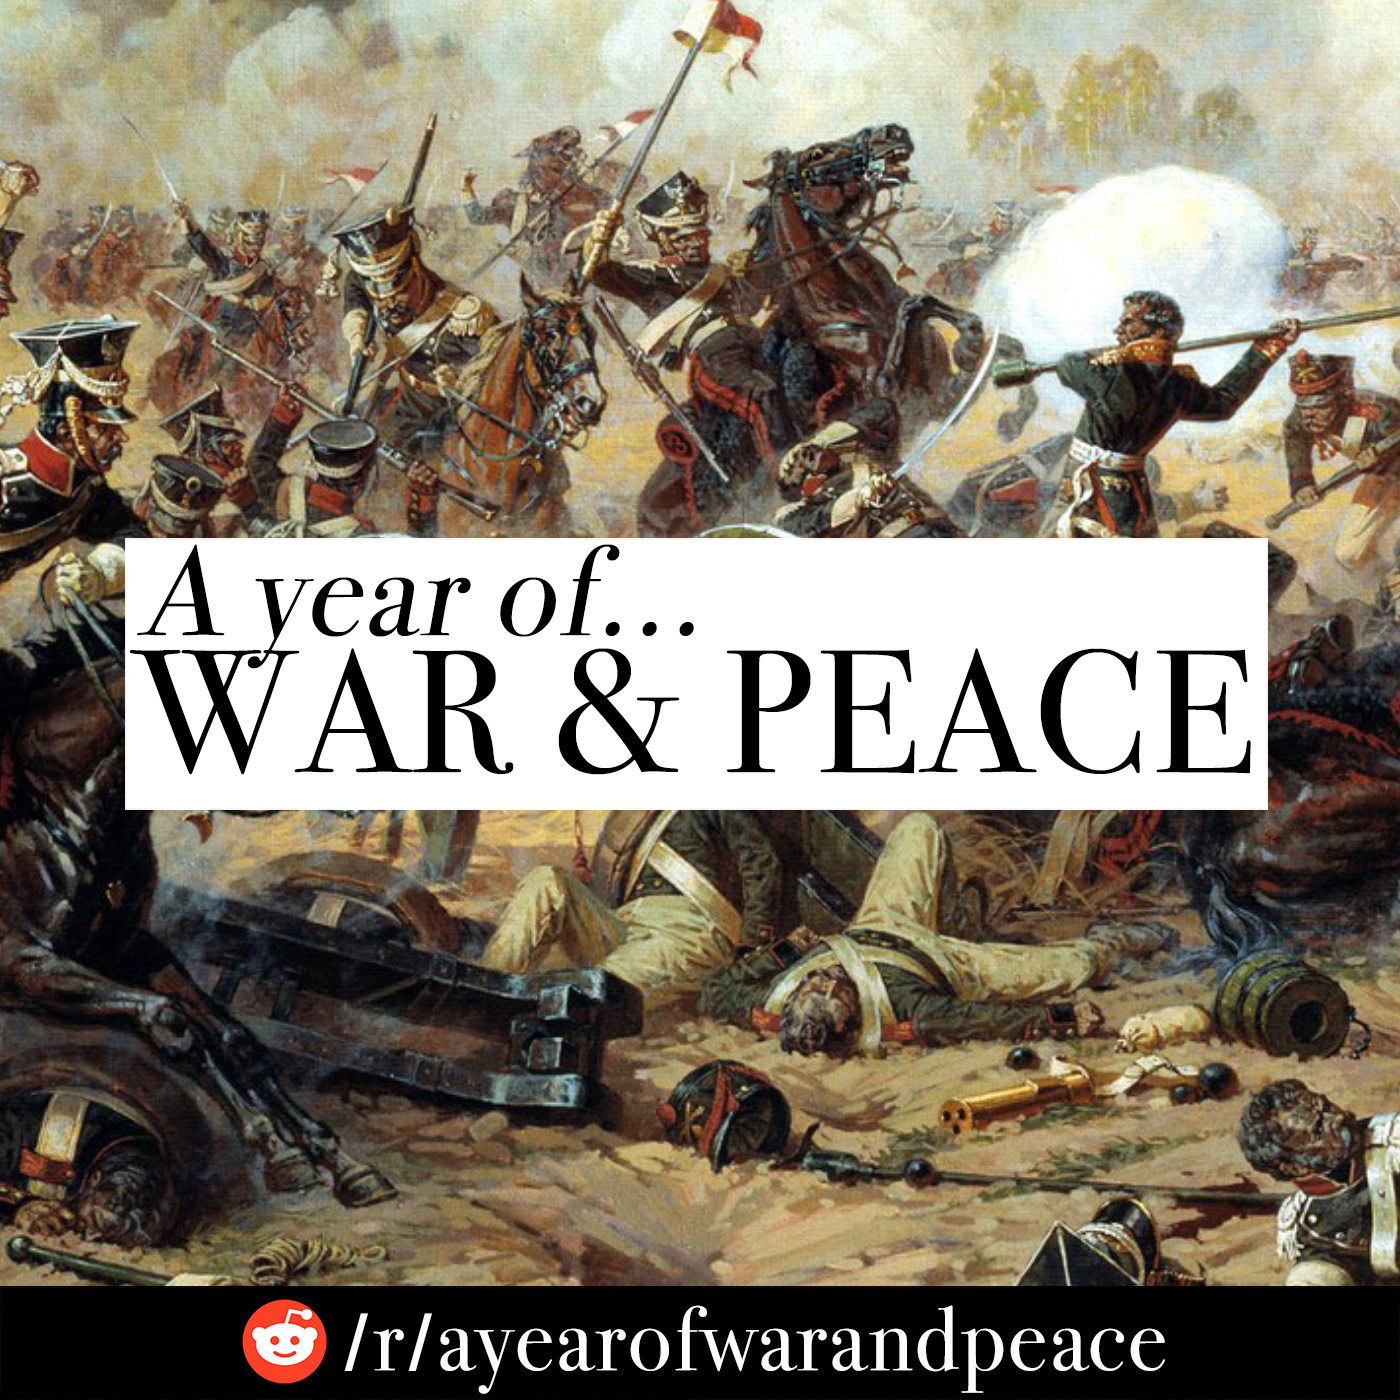 245 - Book 11, Chapter 16. War & Peace Audiobook and Discussion